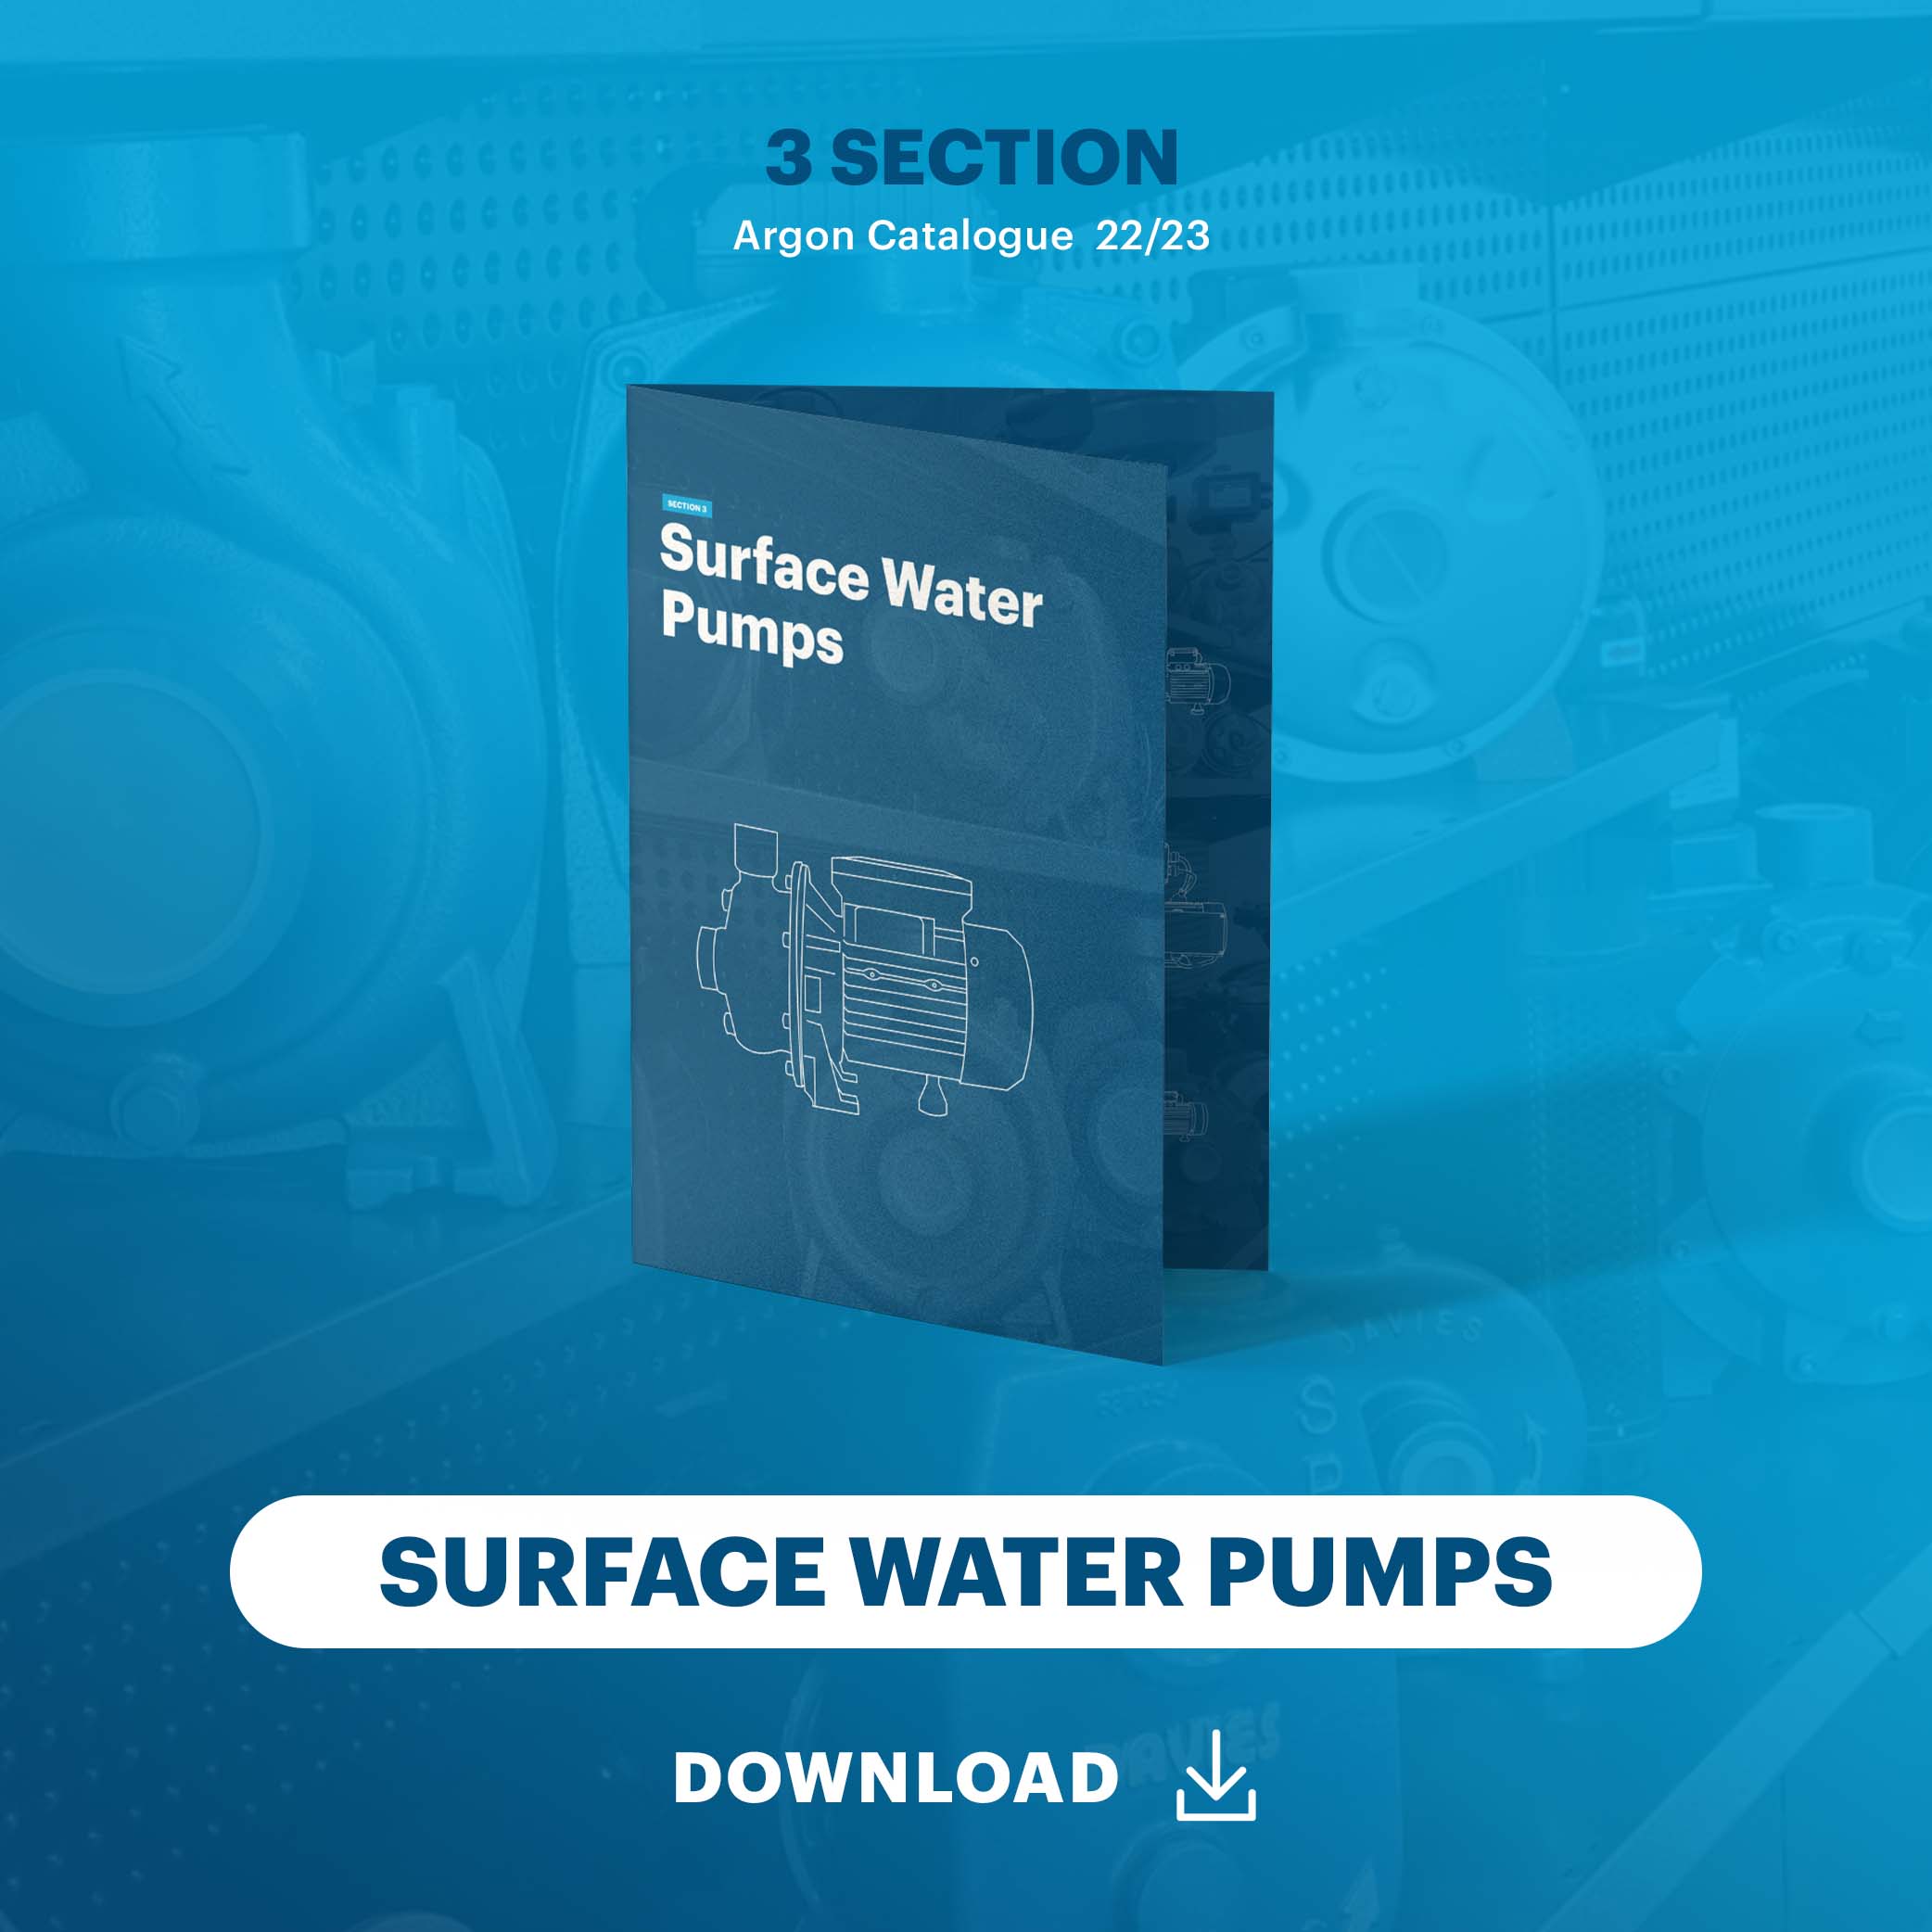 3 Surface Water Pumps